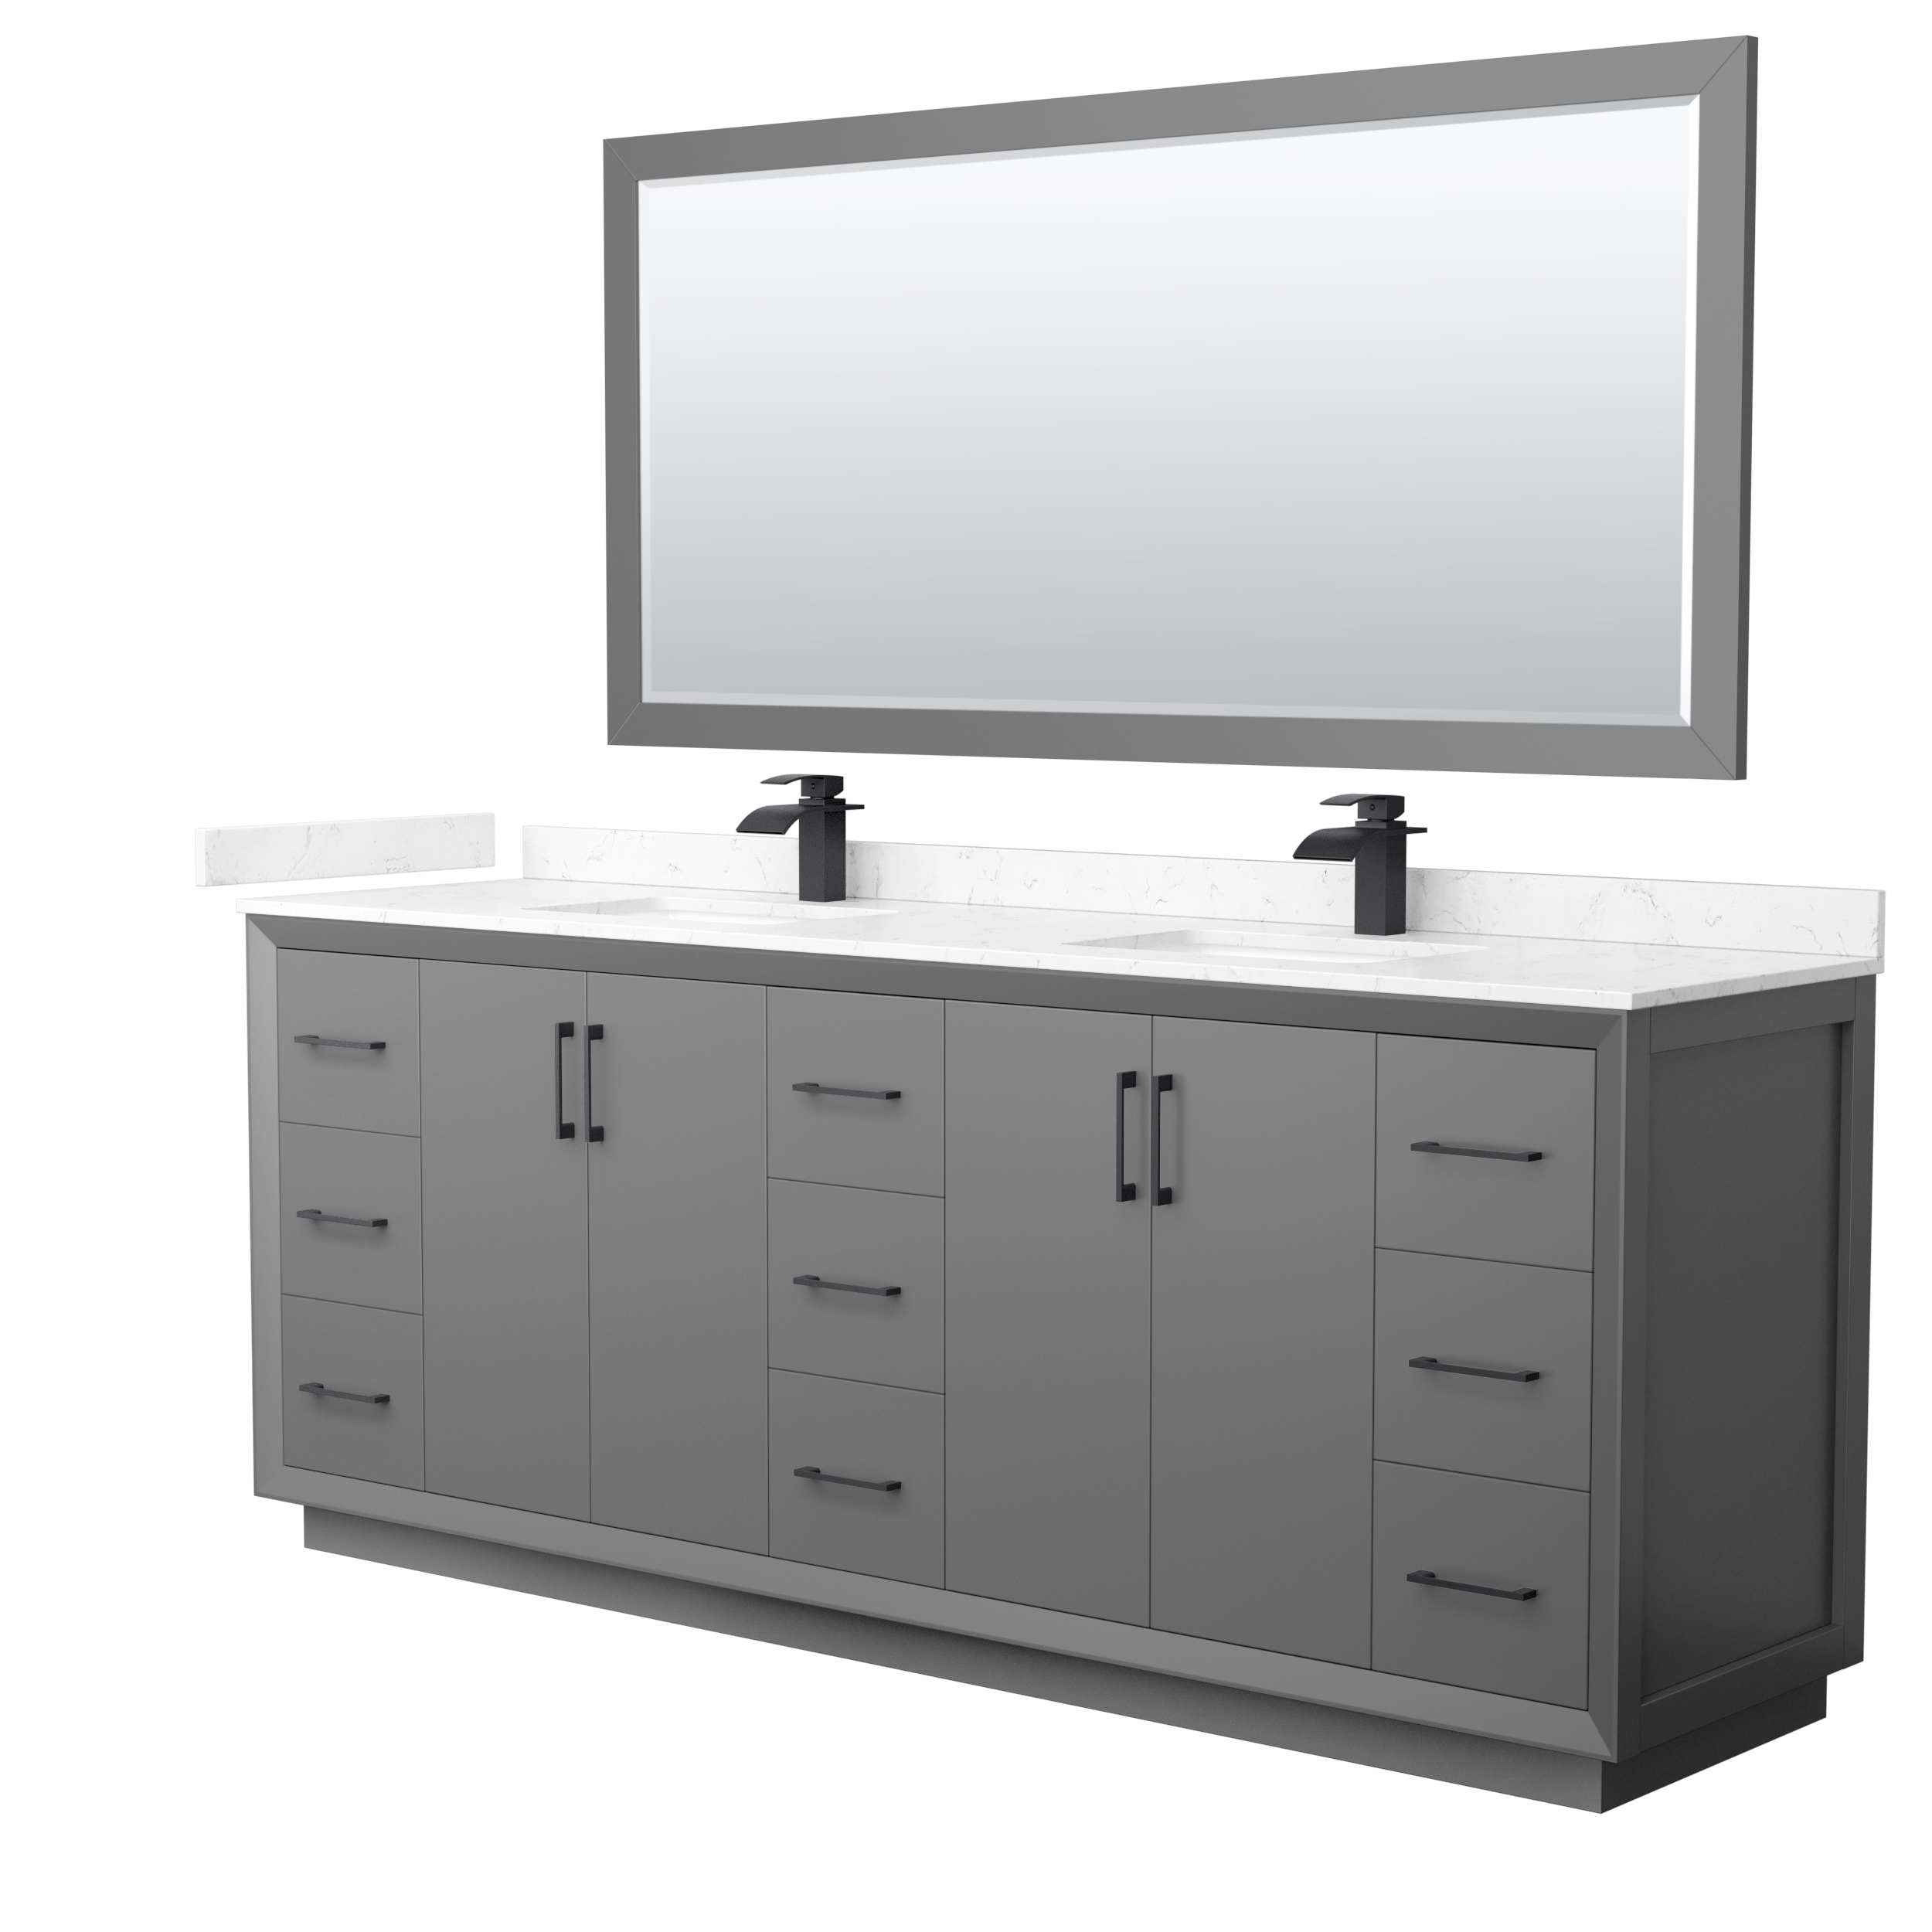 84" Transitional Double Vanity Base in Dark Grey, 3 Top Option, with 3 Hardware Options and Mirror Option